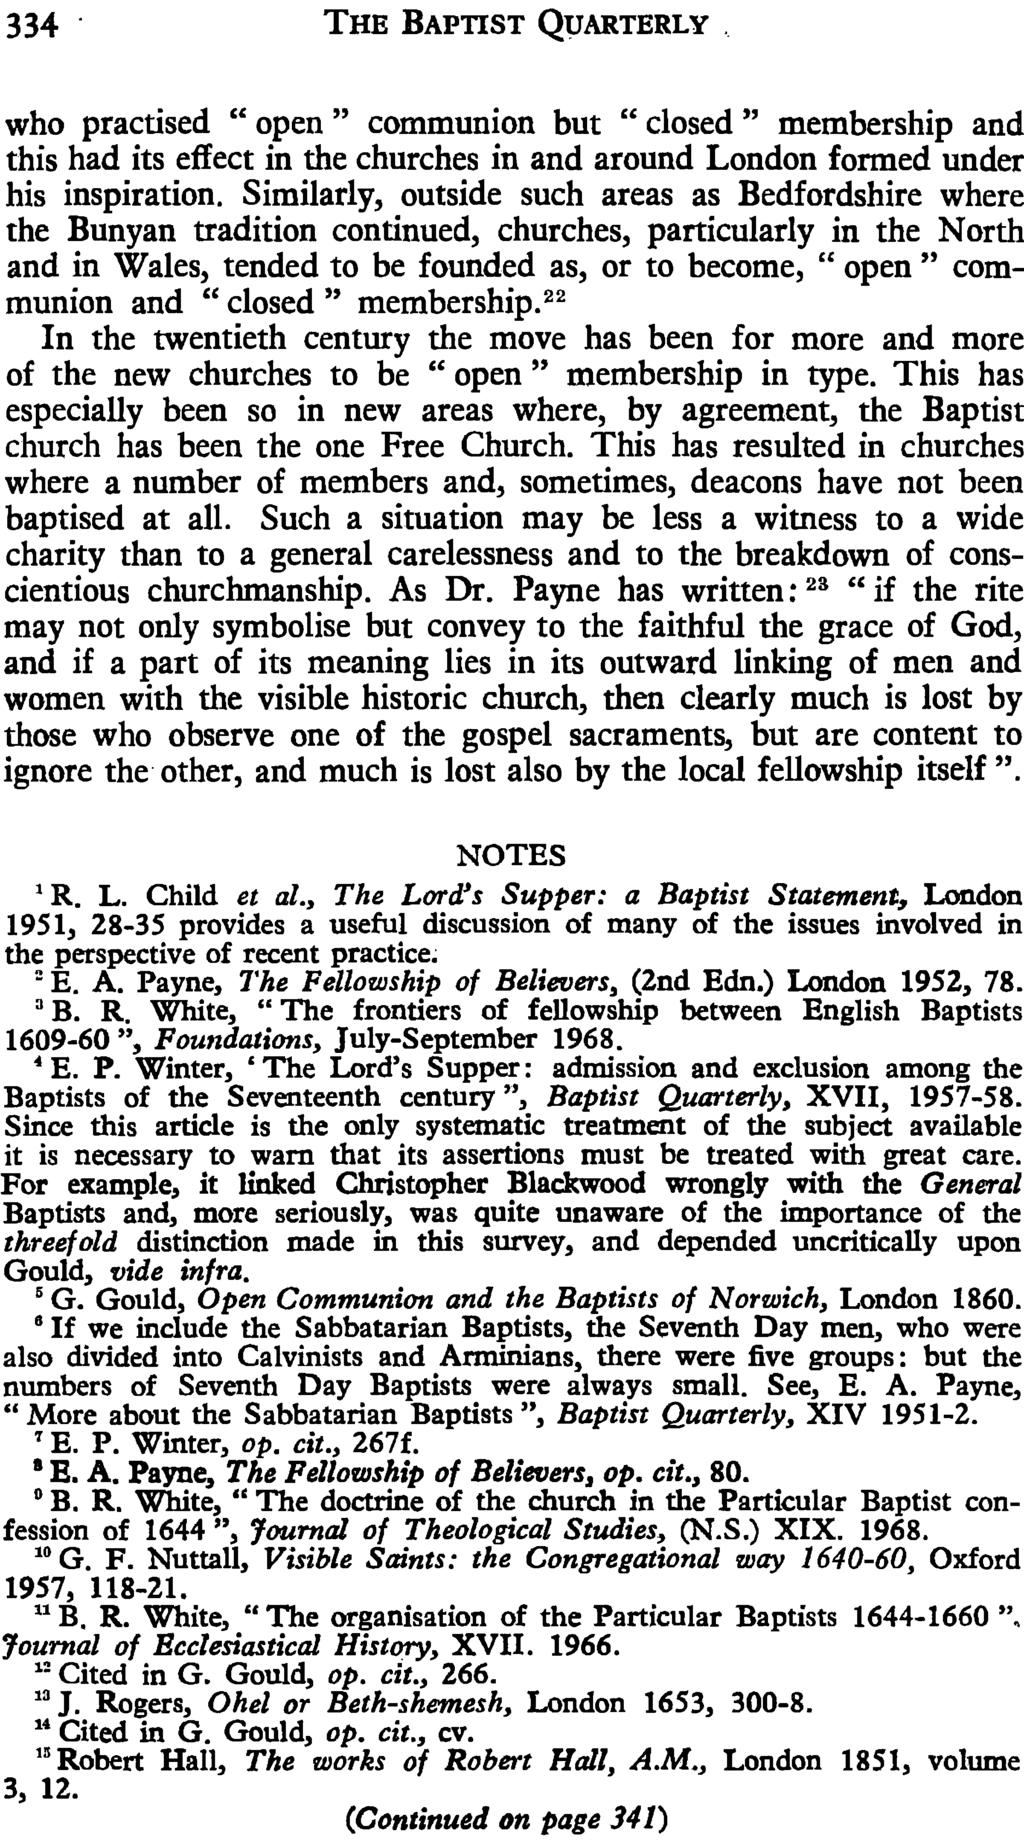 334. THE BAPTIST QUARTERLY. who practised "open" communion but "closed" membership and this had its effect in the churches in and around London formed under his inspiration.